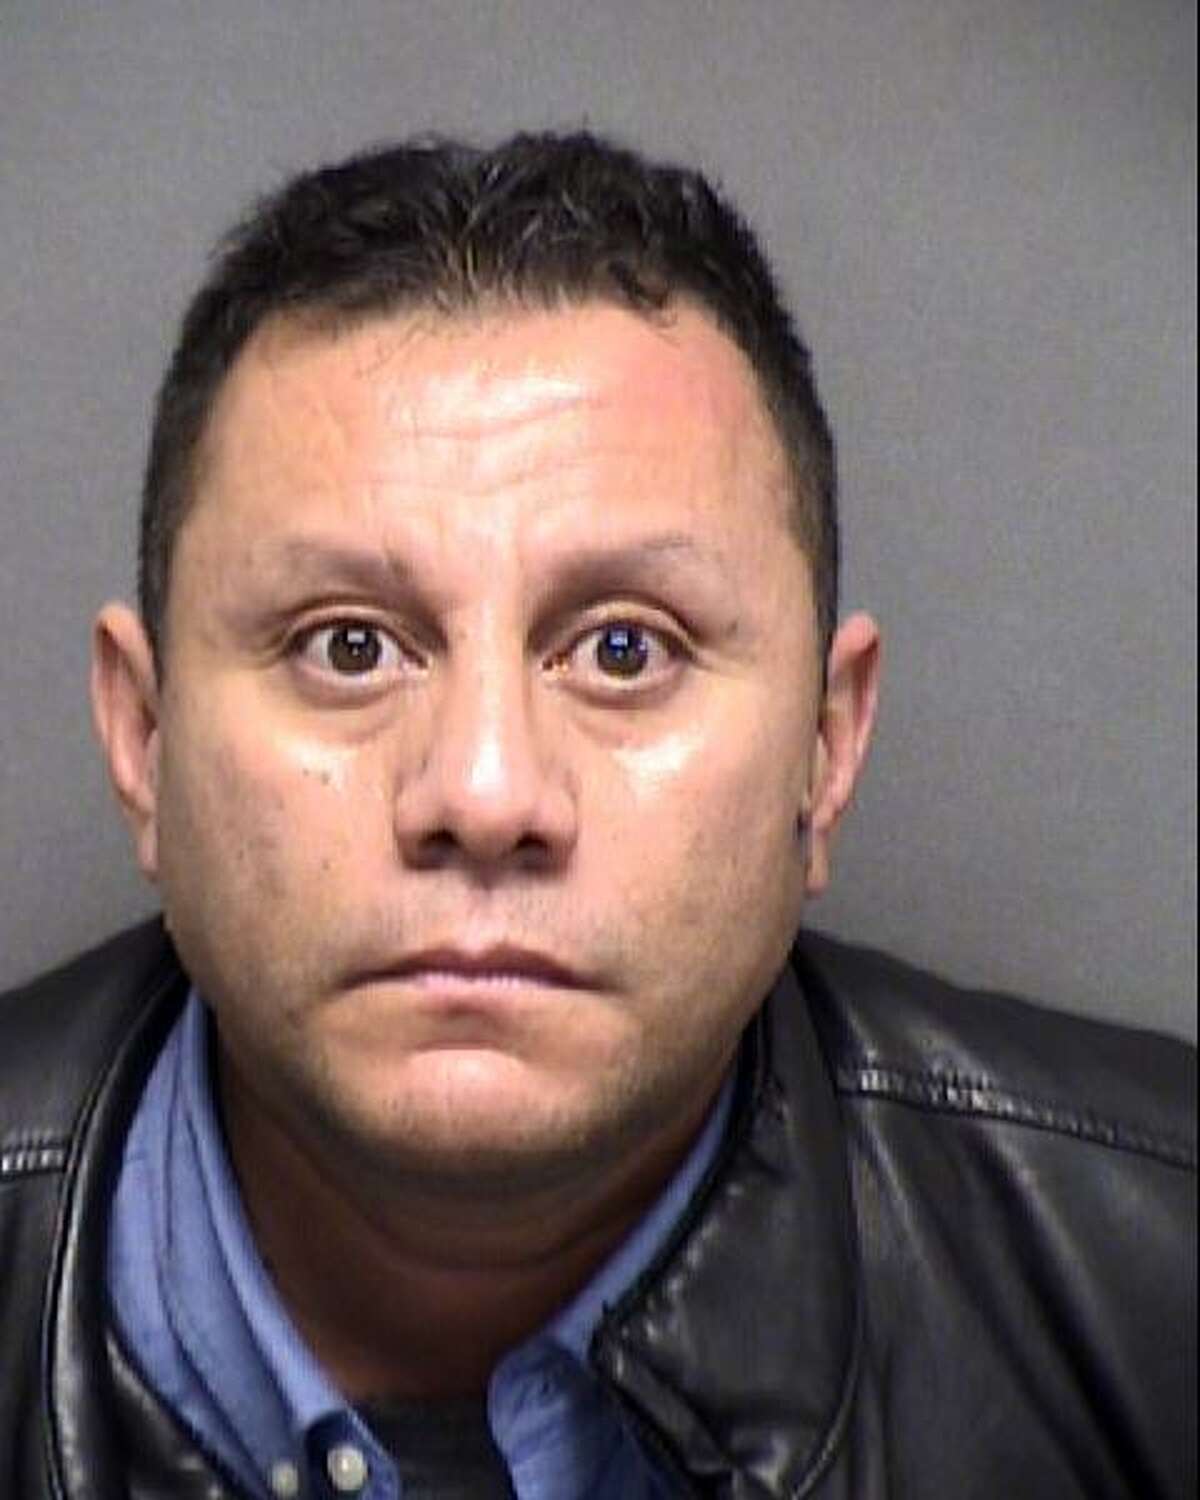 Juventino Rivas Jr. was arrested Jan. 9 on charges of failure to stop and render aid resulting in death.